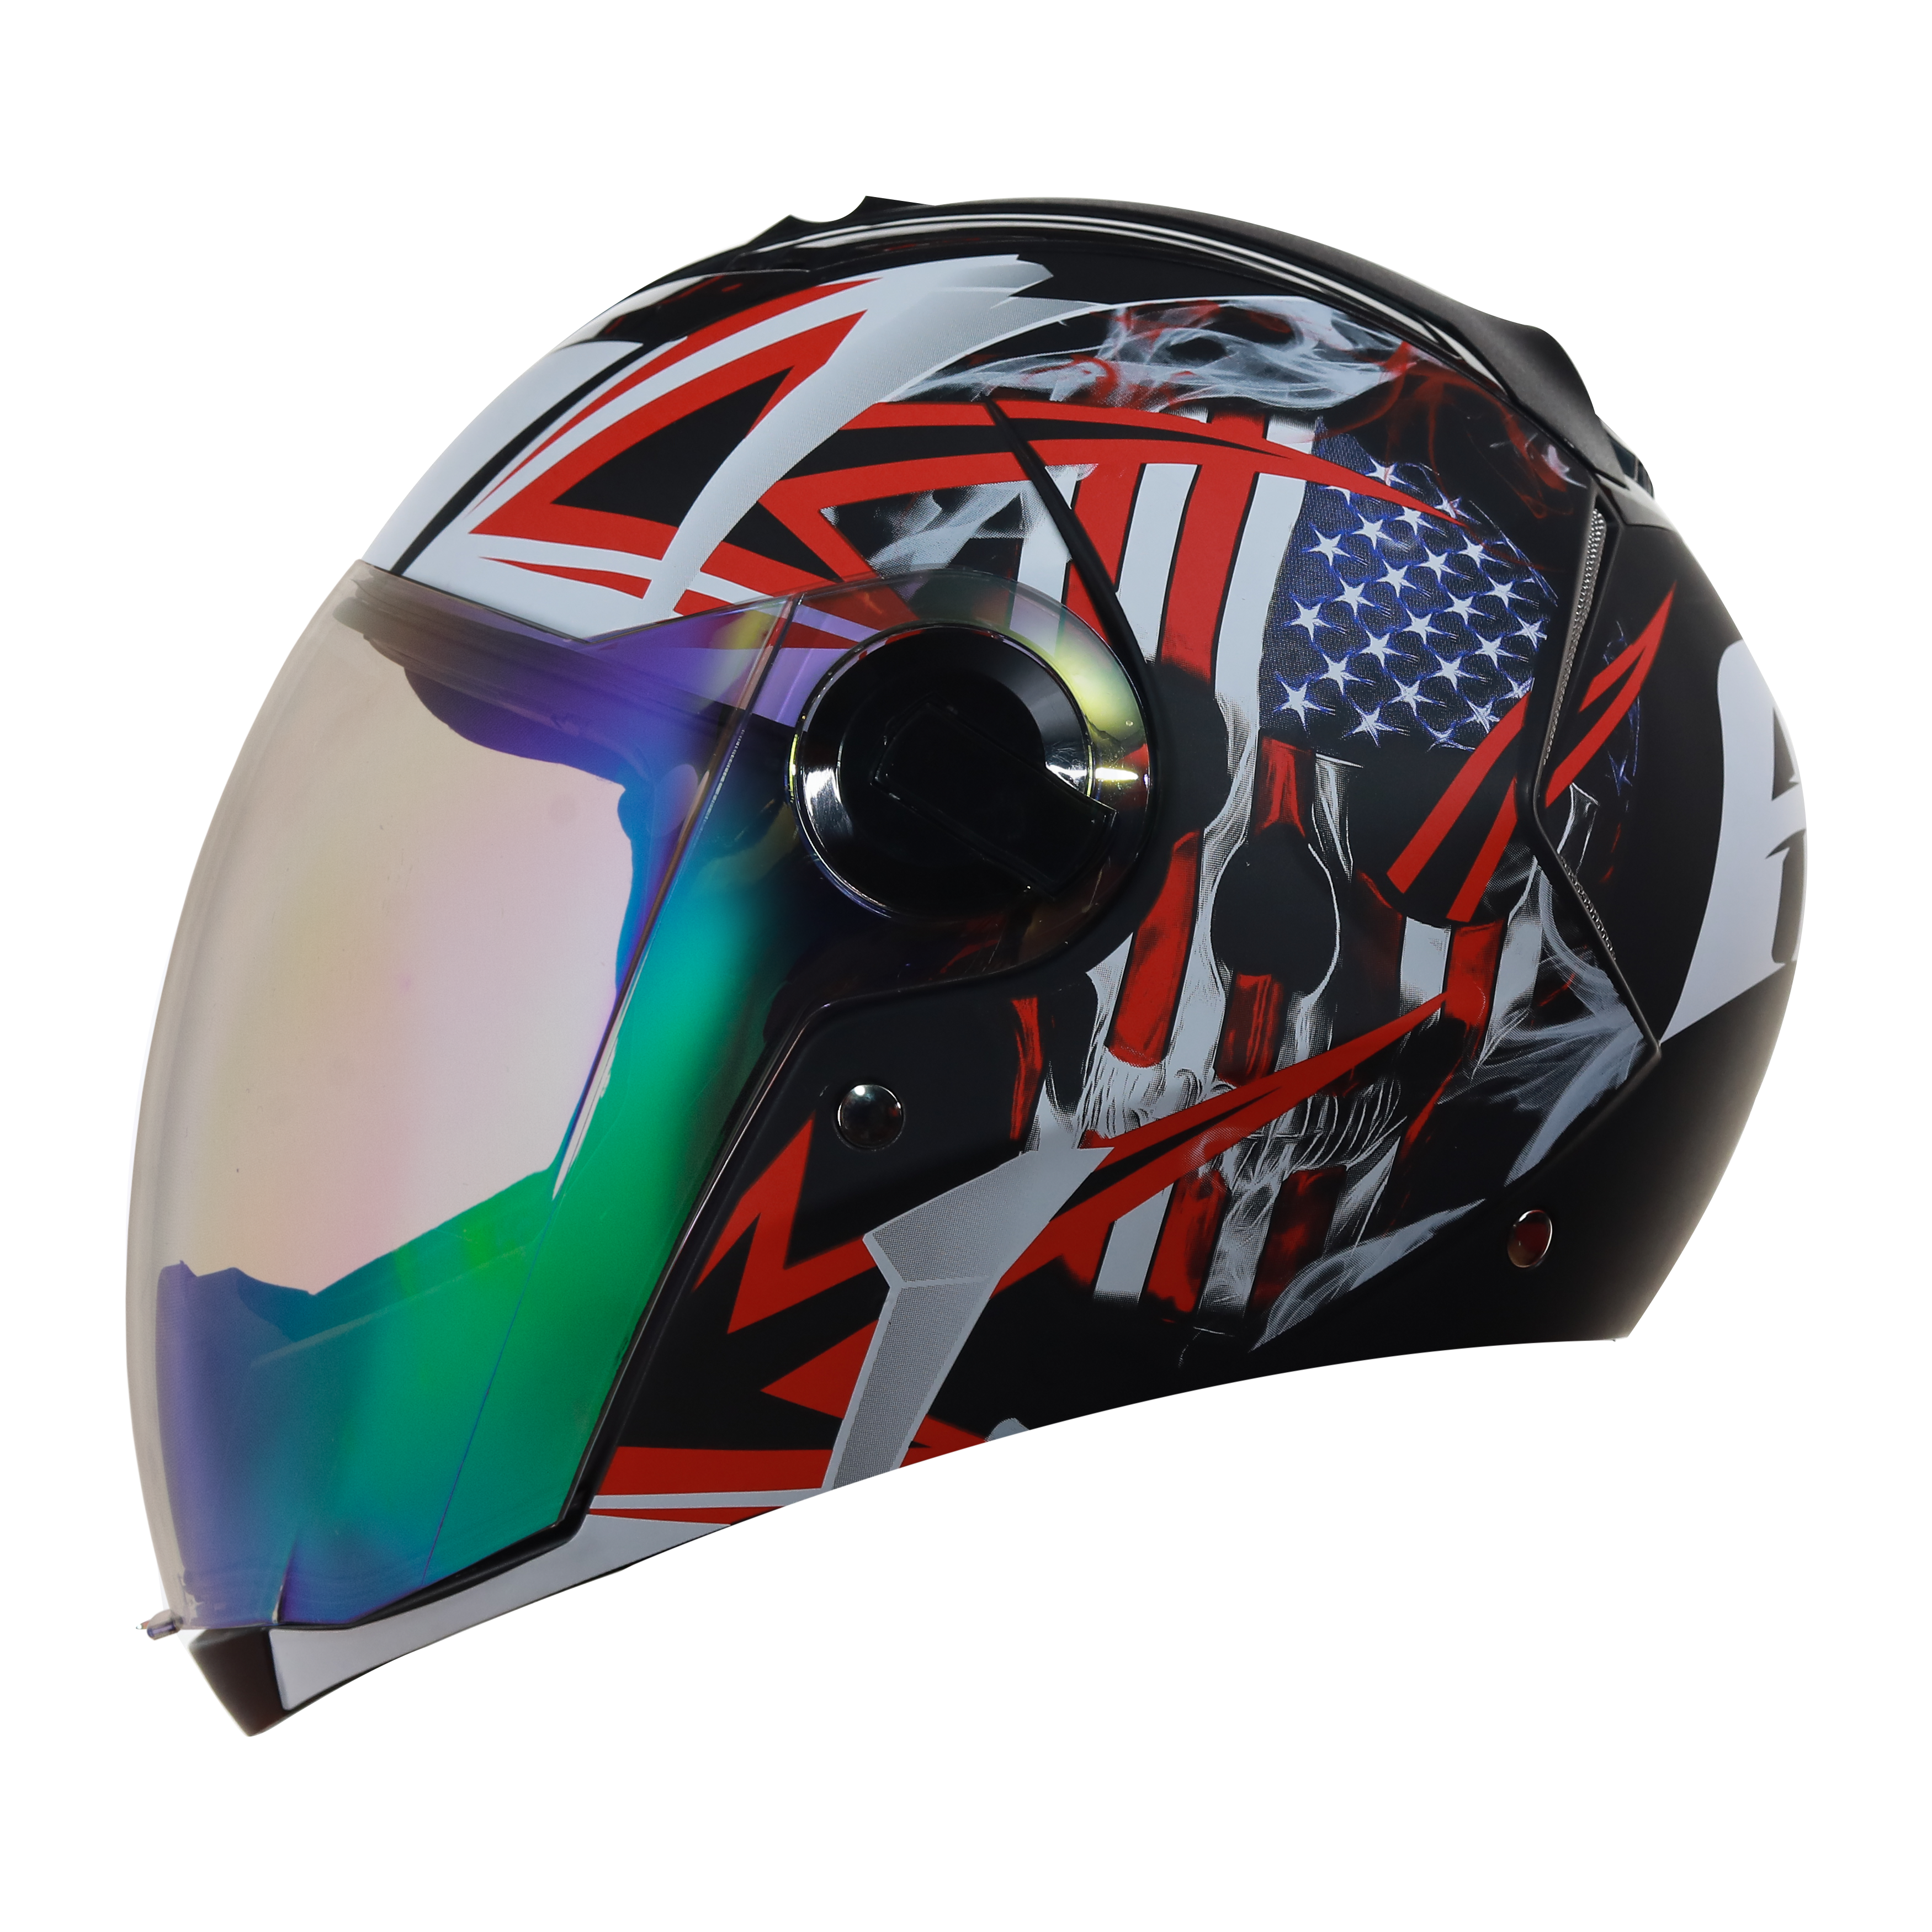 SBA-2 Skull Flag Mat Black With Red ( Fitted With Clear Visor  Extra Rainbow Night Vision Visor Free)